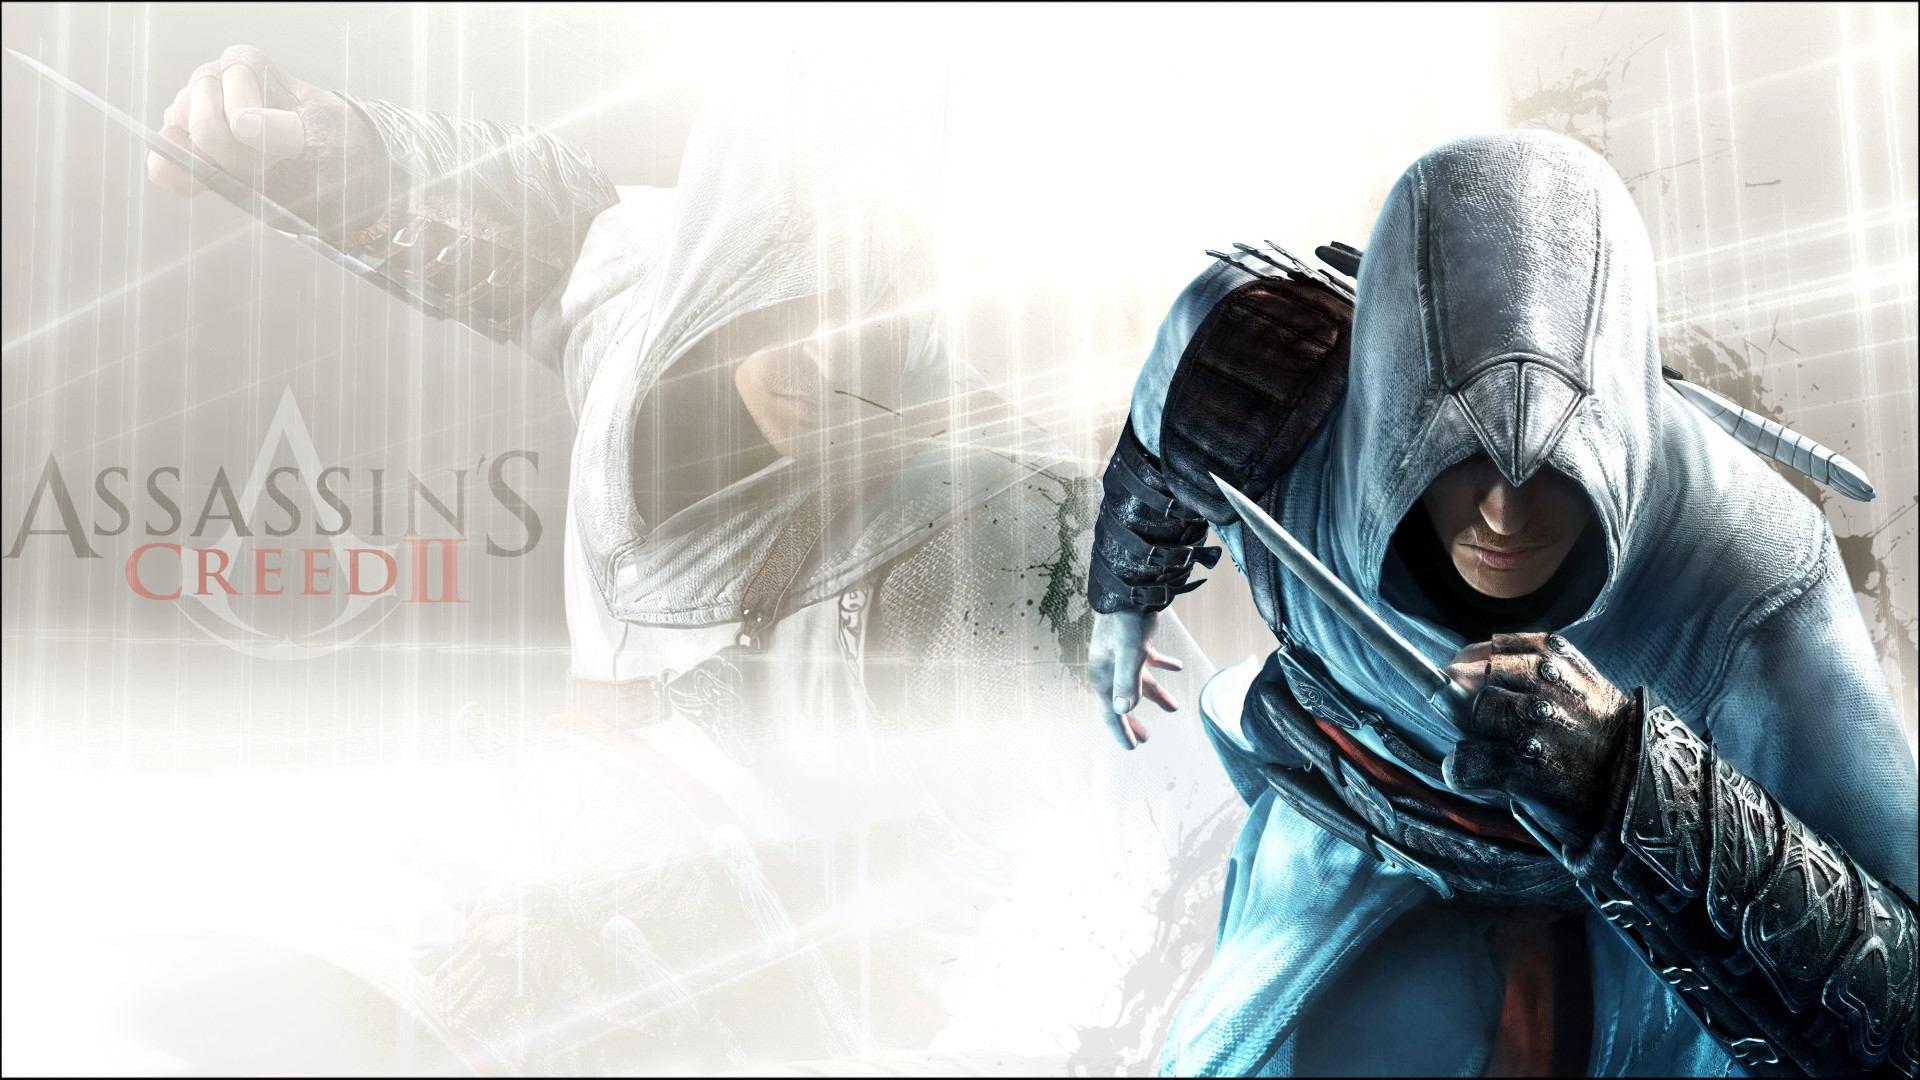 1920x1080 Assassins Creed 2 Wallpaper by stiannius Assassins Creed 2 Wallpaper by  stiannius